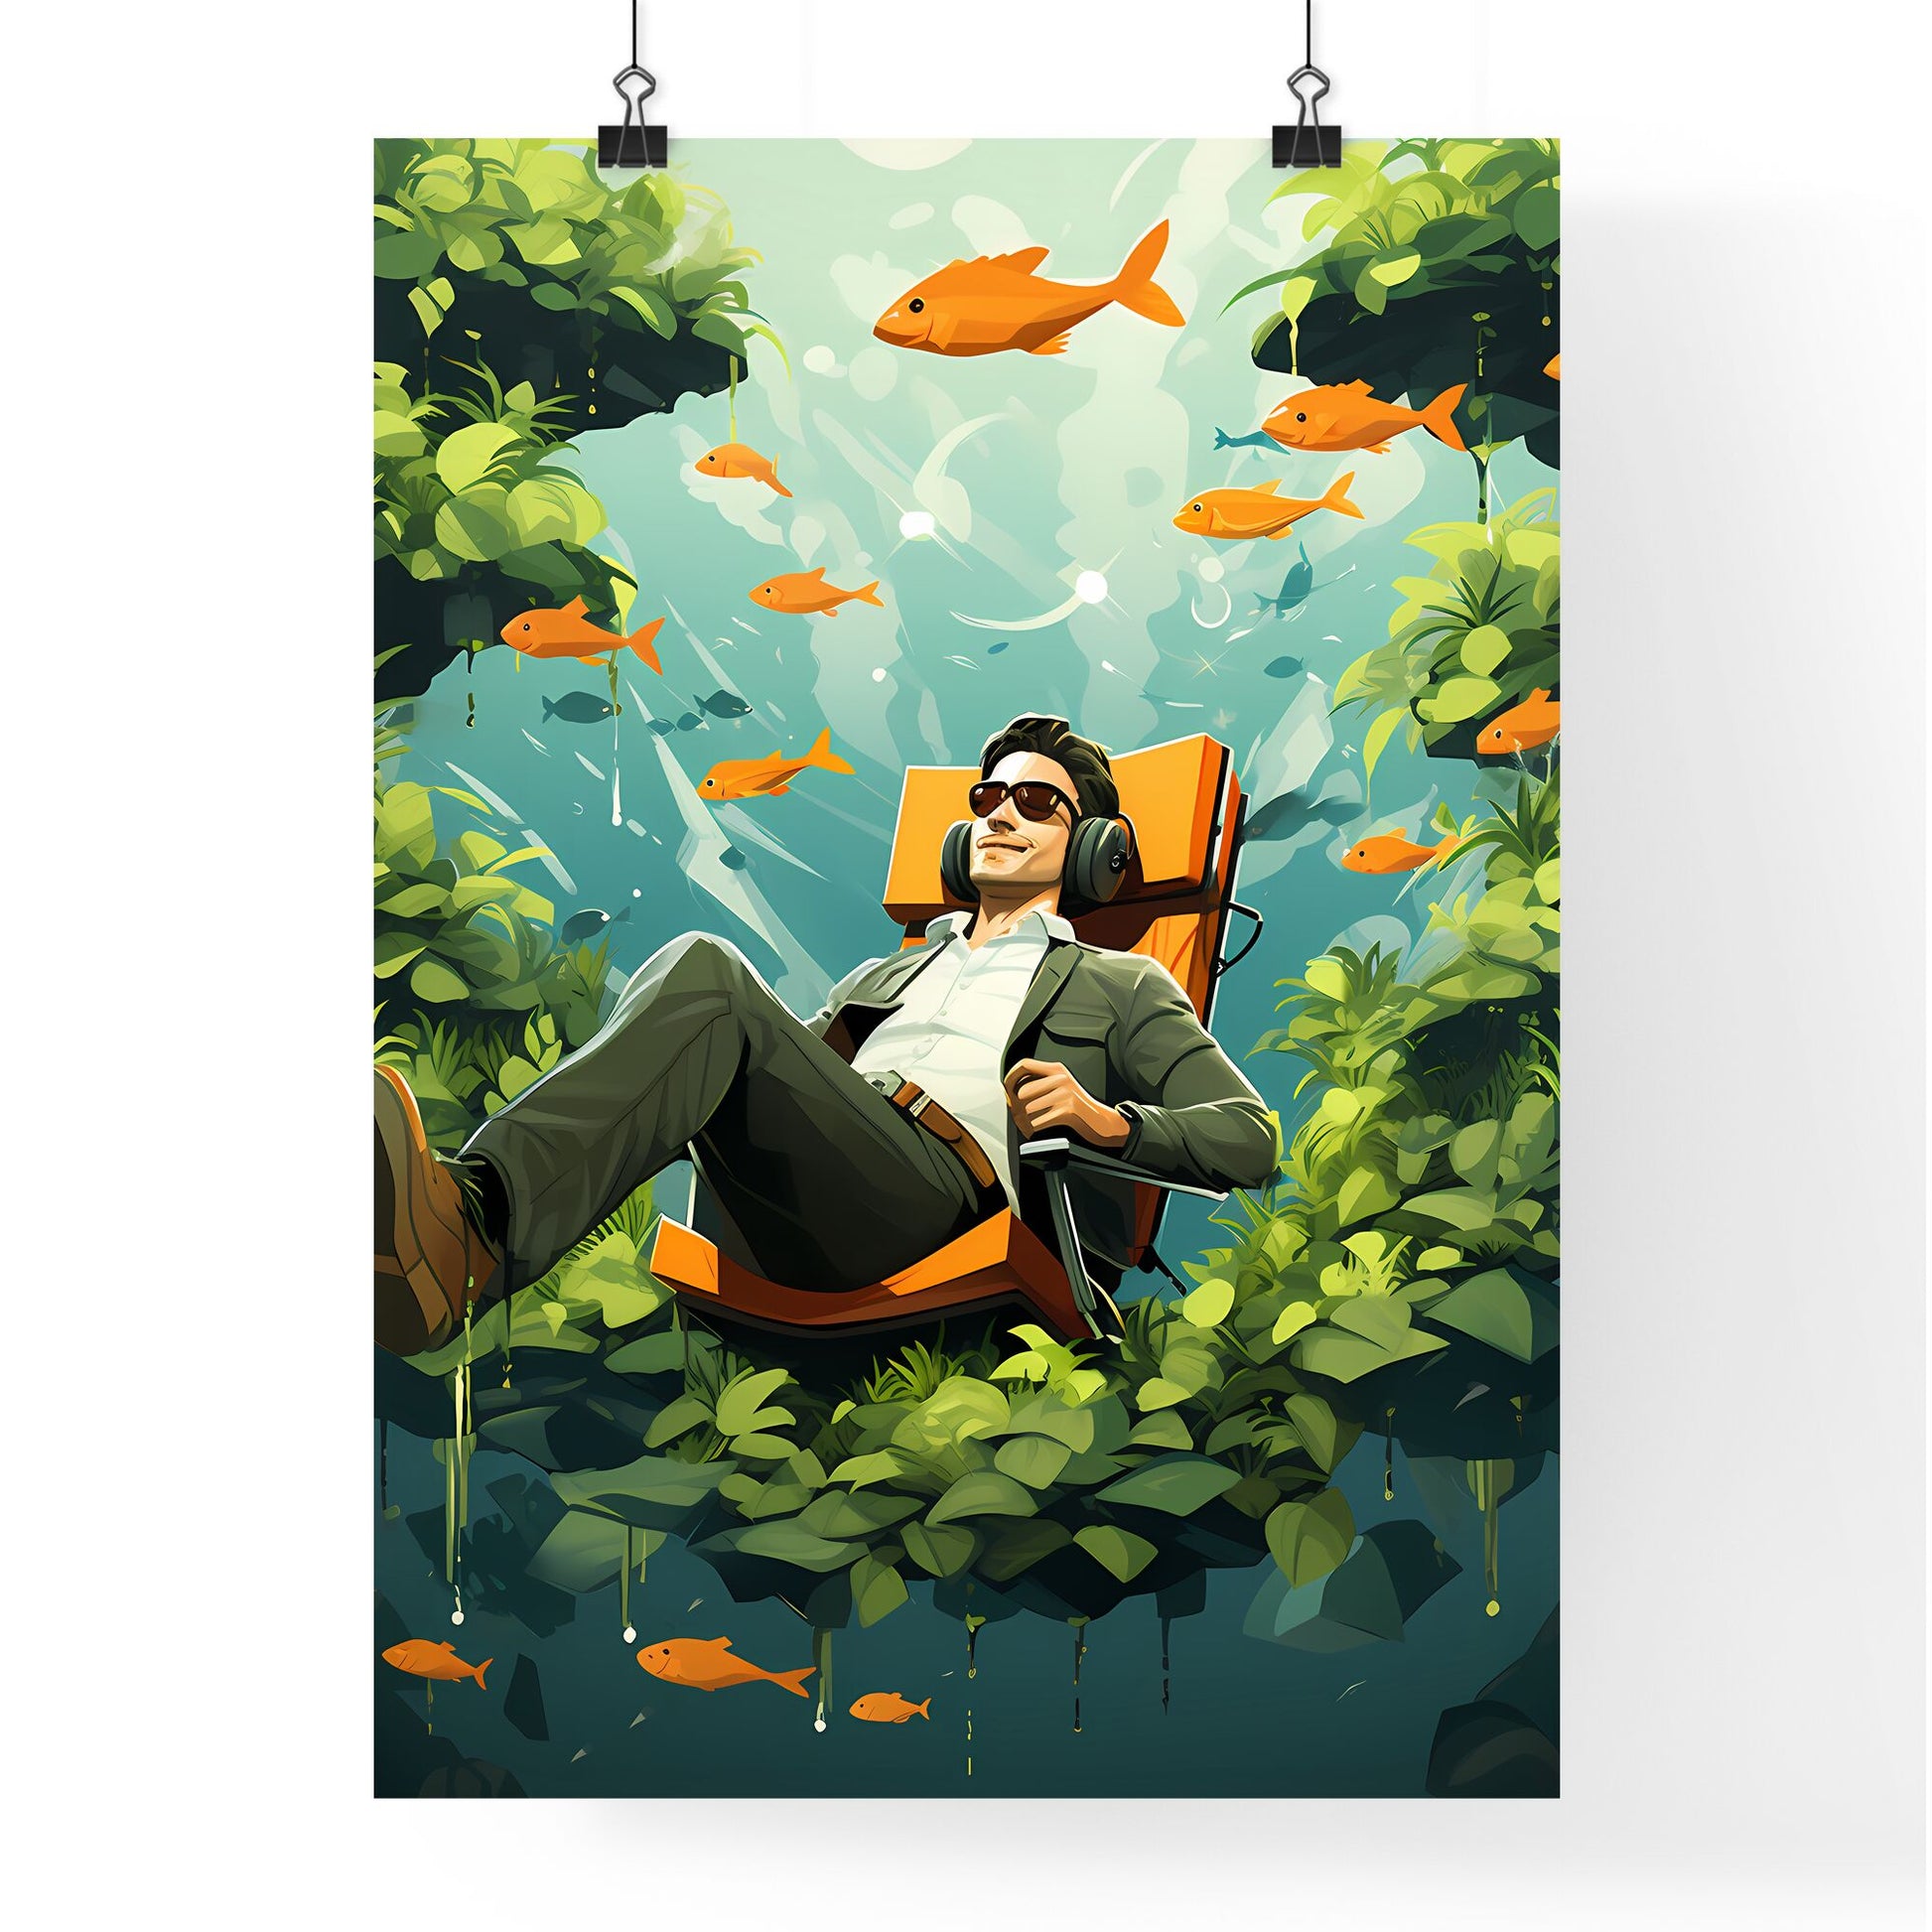 Today, your inner voice is louder and clearer - Art print of a man sitting in a chair surrounded by plants and goldfish Default Title